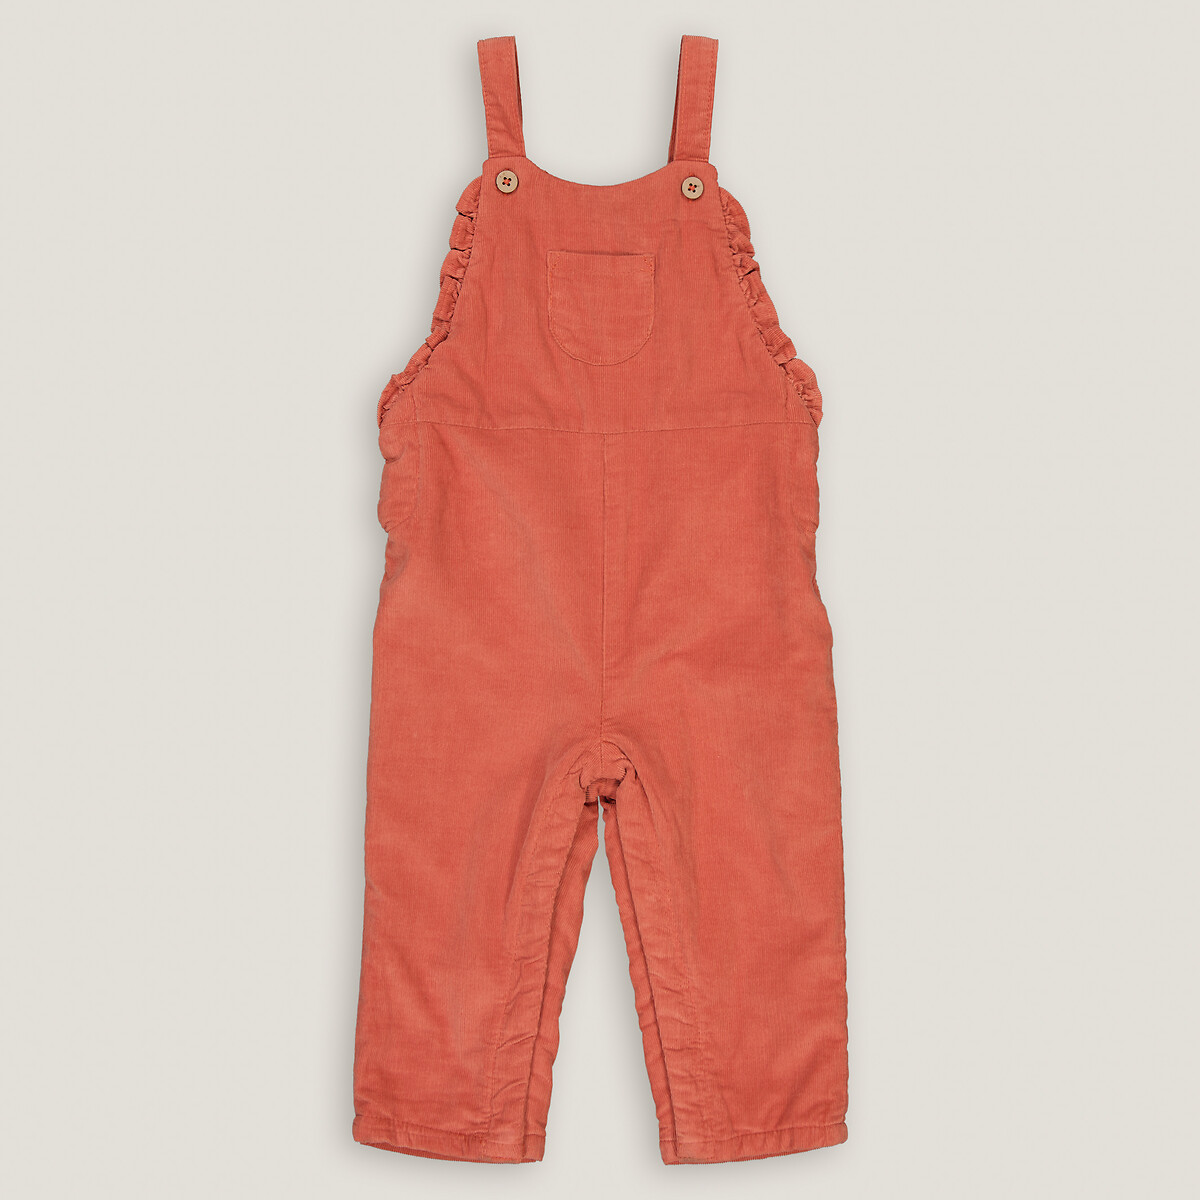 Corduroy Dungarees By La Redoute